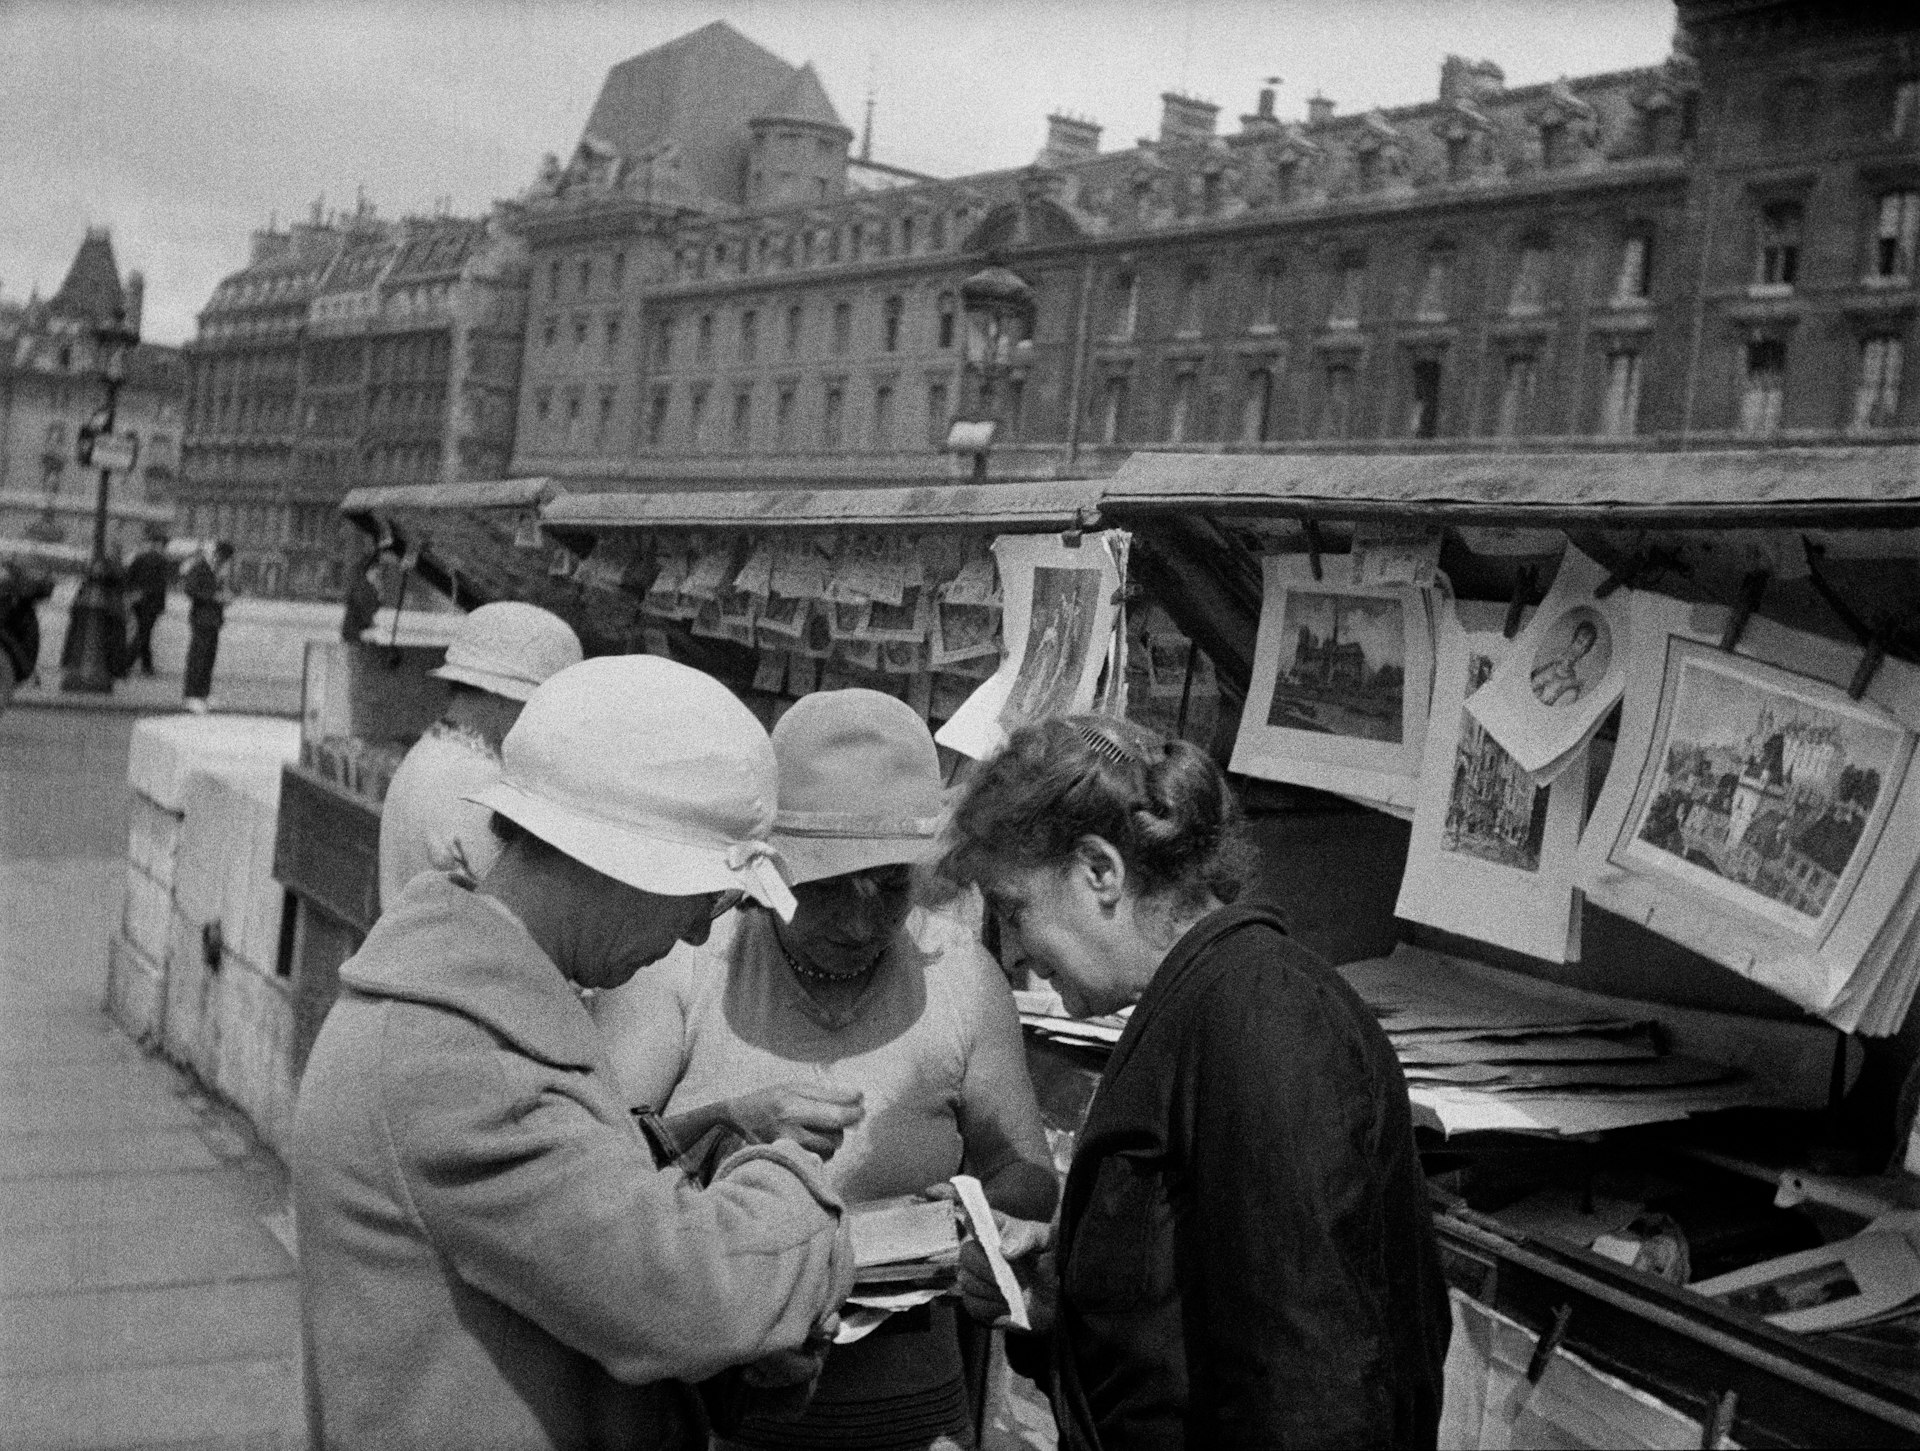 Fashionable women browse for books along the Seine